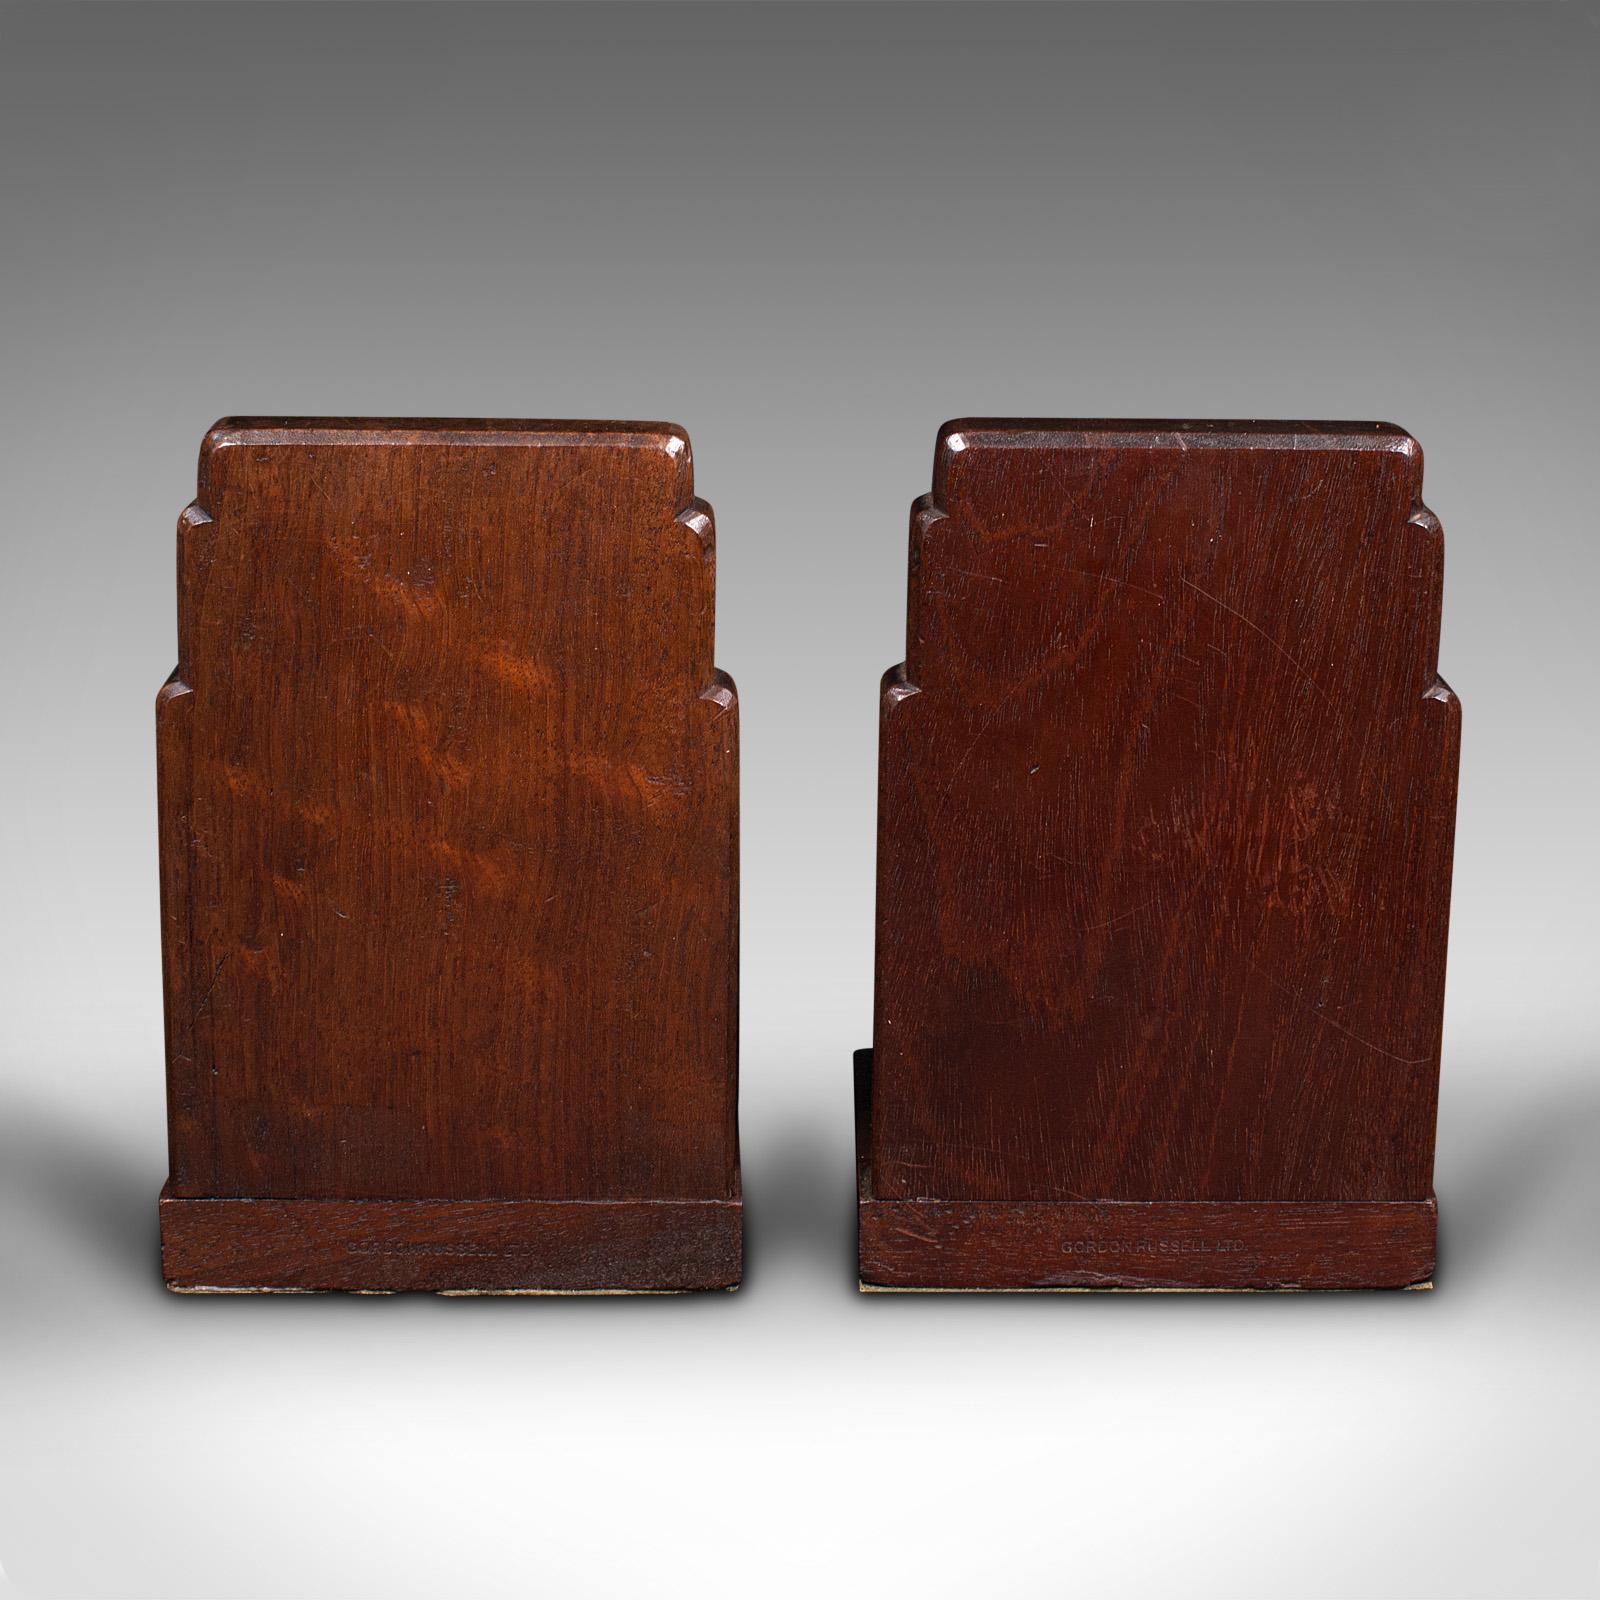 Vintage Pair of Decorative Bookends, English, Walnut, Gordon Russell, Circa 1930 In Good Condition For Sale In Hele, Devon, GB